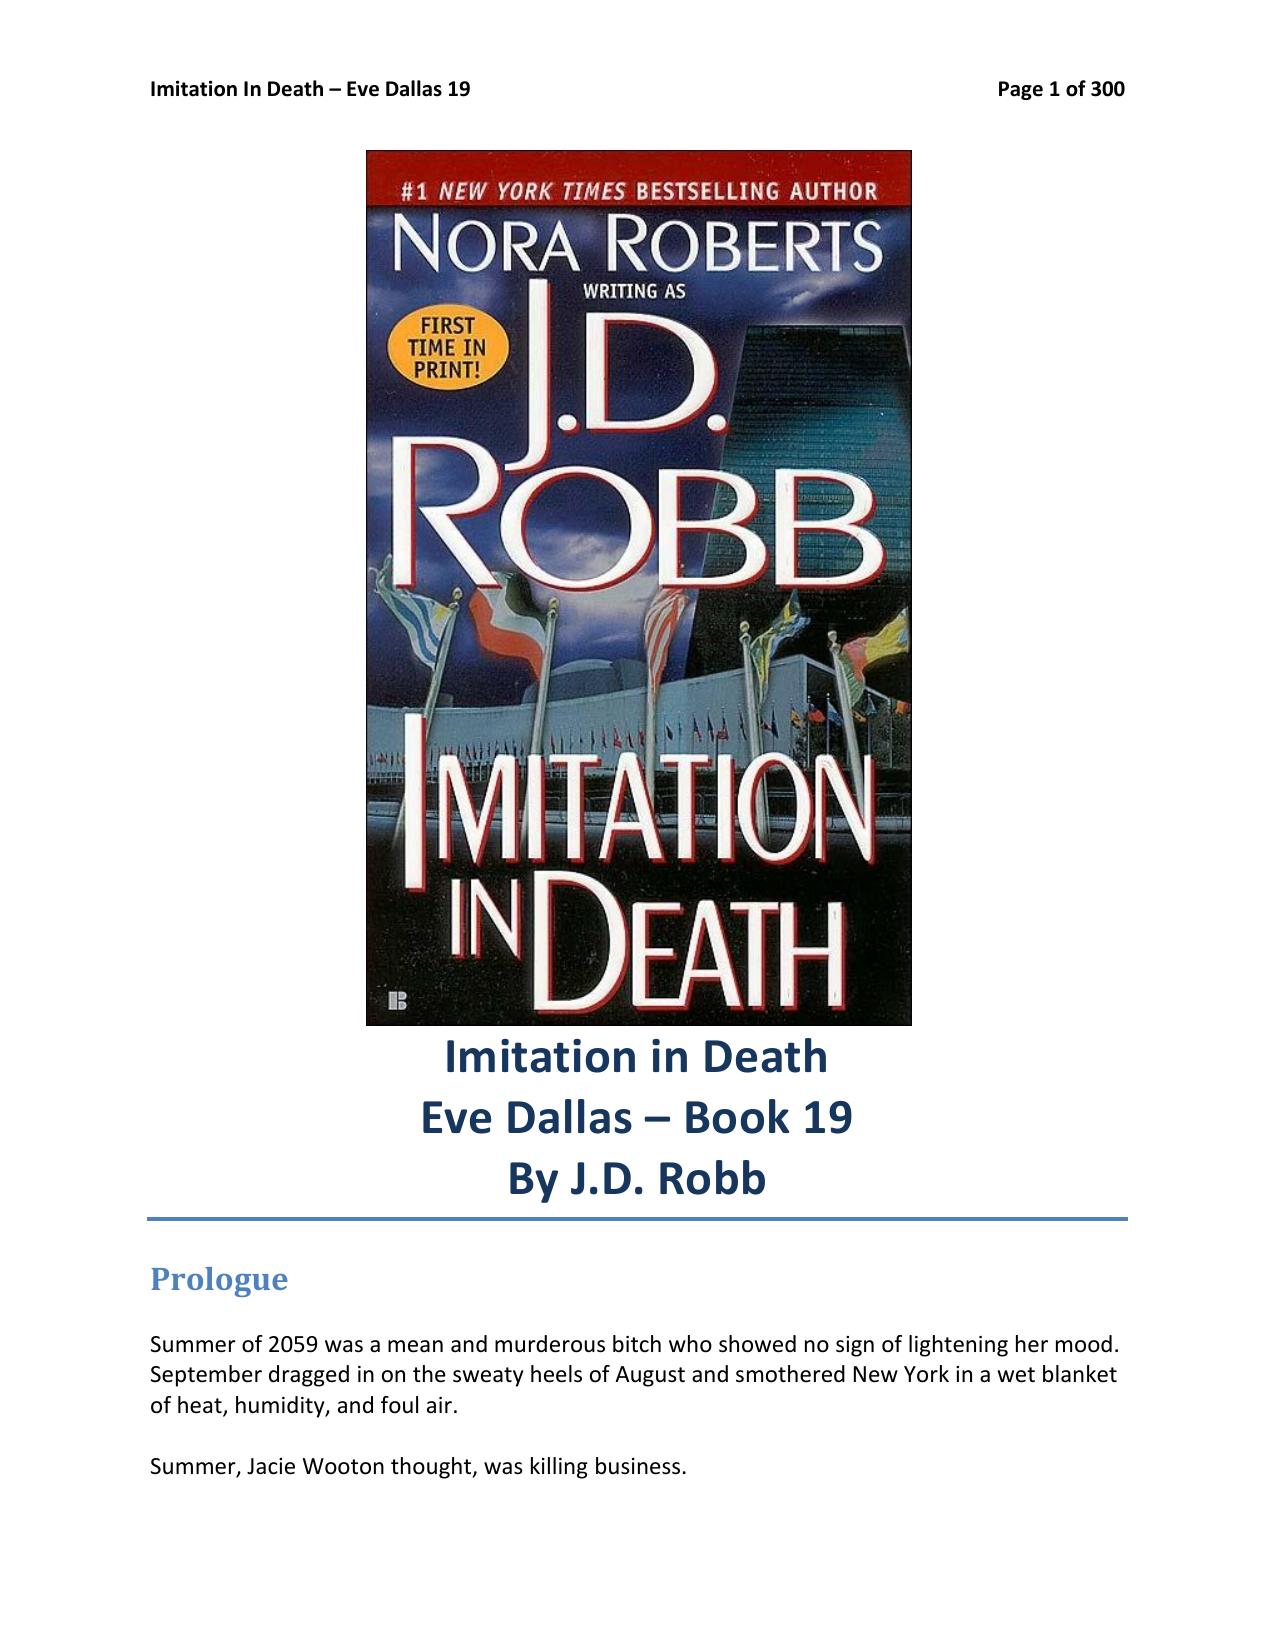 Imitation In Death by J.D. Robb